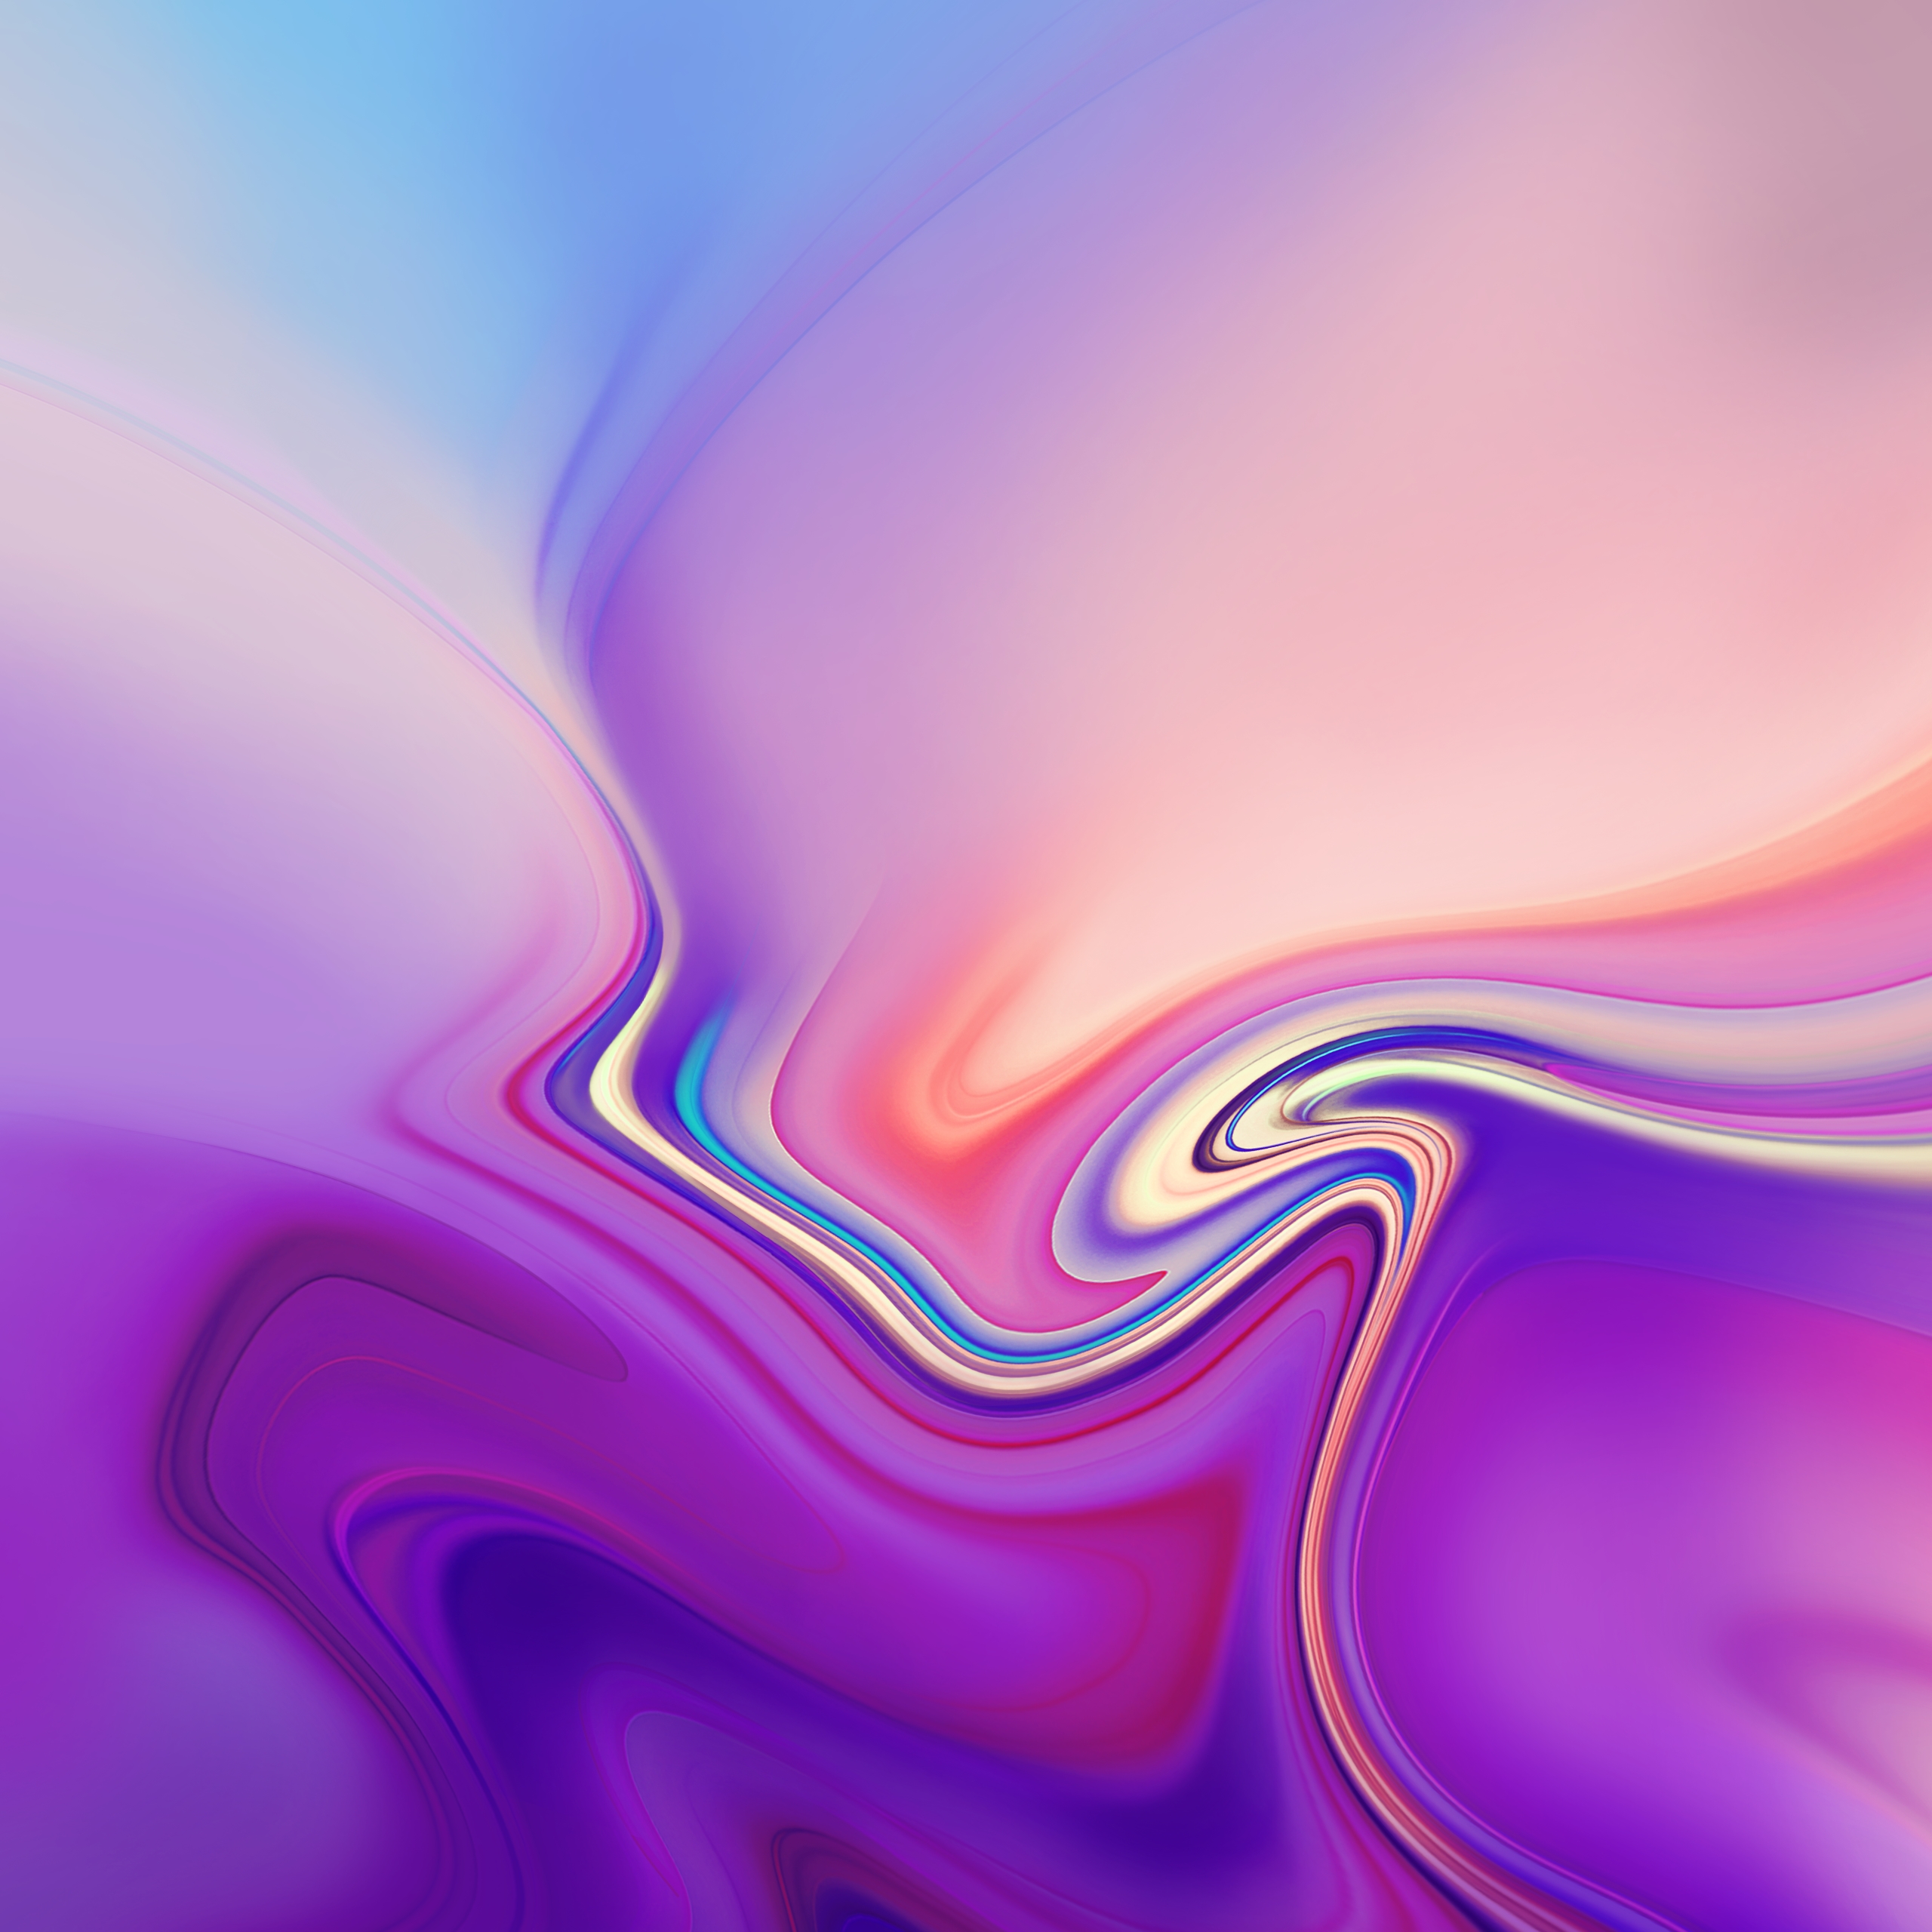 Samsung Galaxy Note 9 wallpapers are here - all 12 in full resolution